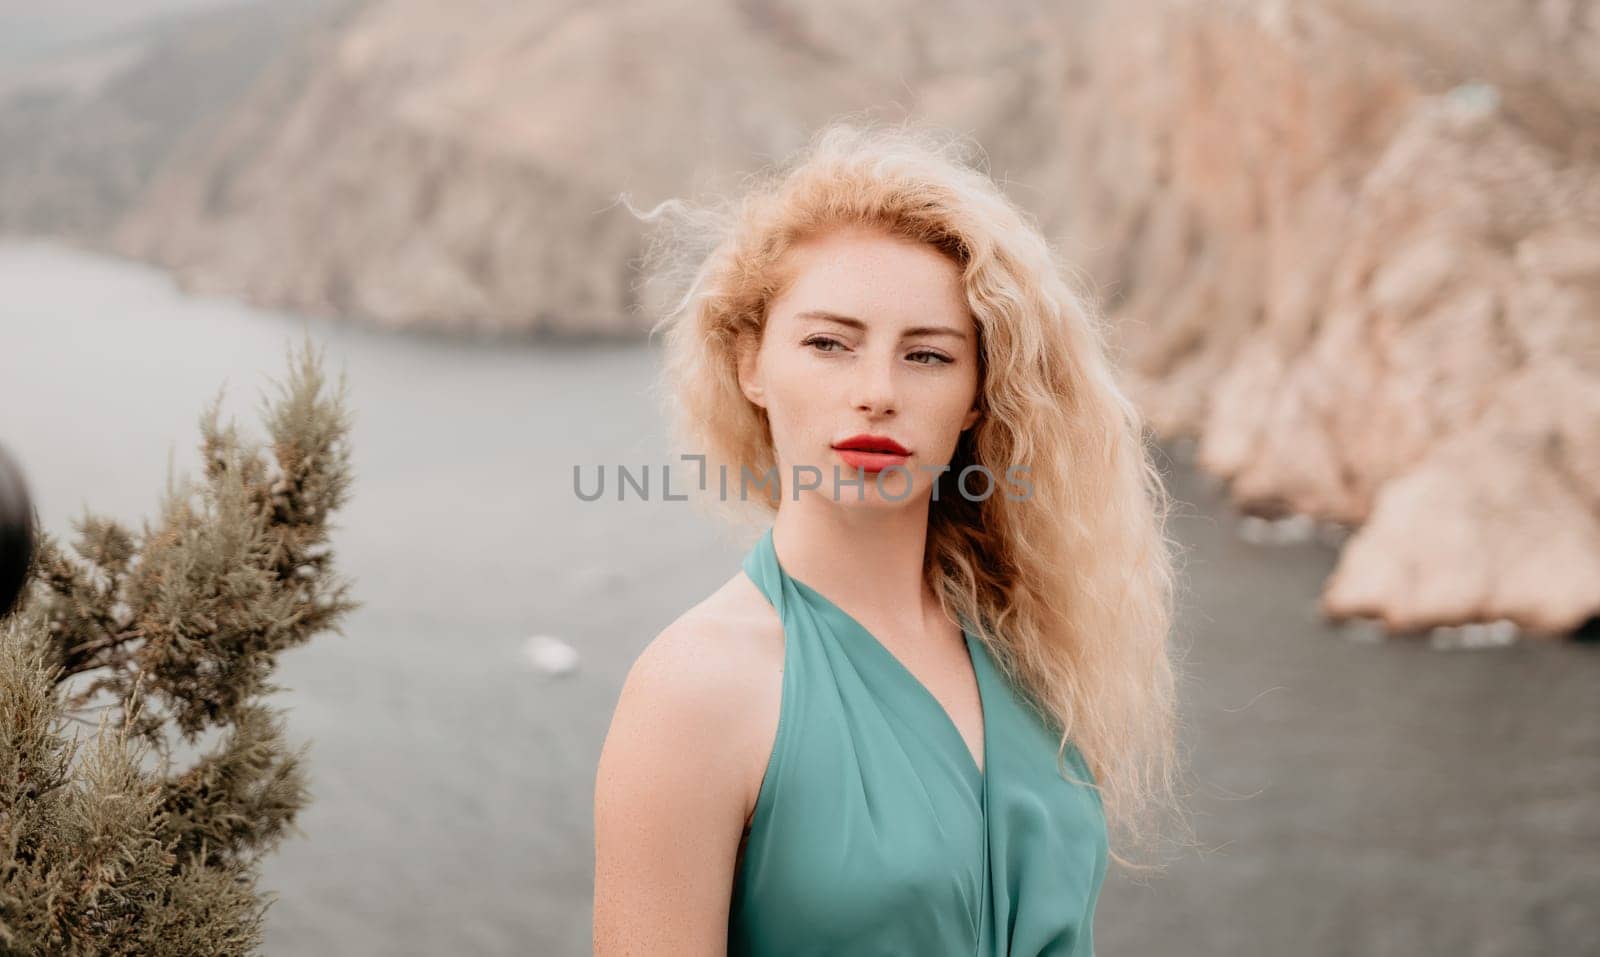 Redhead woman portrait. Curly redhead young caucasian woman with freckles looking at camera and smiling. Close up portrait cute woman in a mint long dress posing on a volcanic rock high above the sea by panophotograph